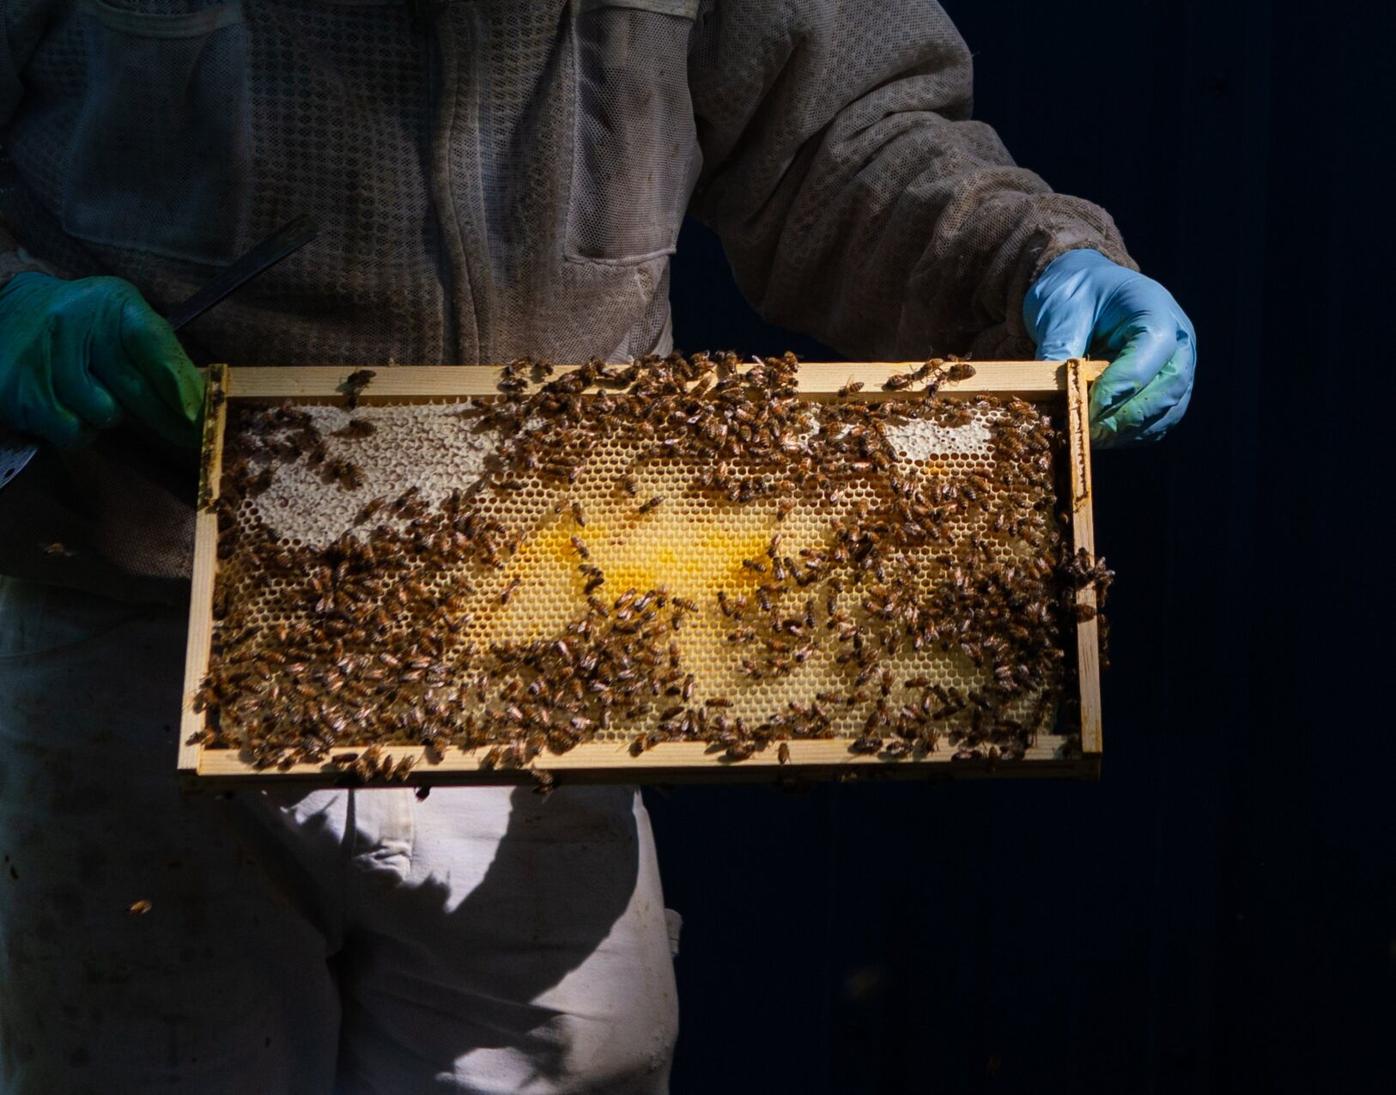 Beekeeping Is All the Rage. These Programs Can Help Veterans Get